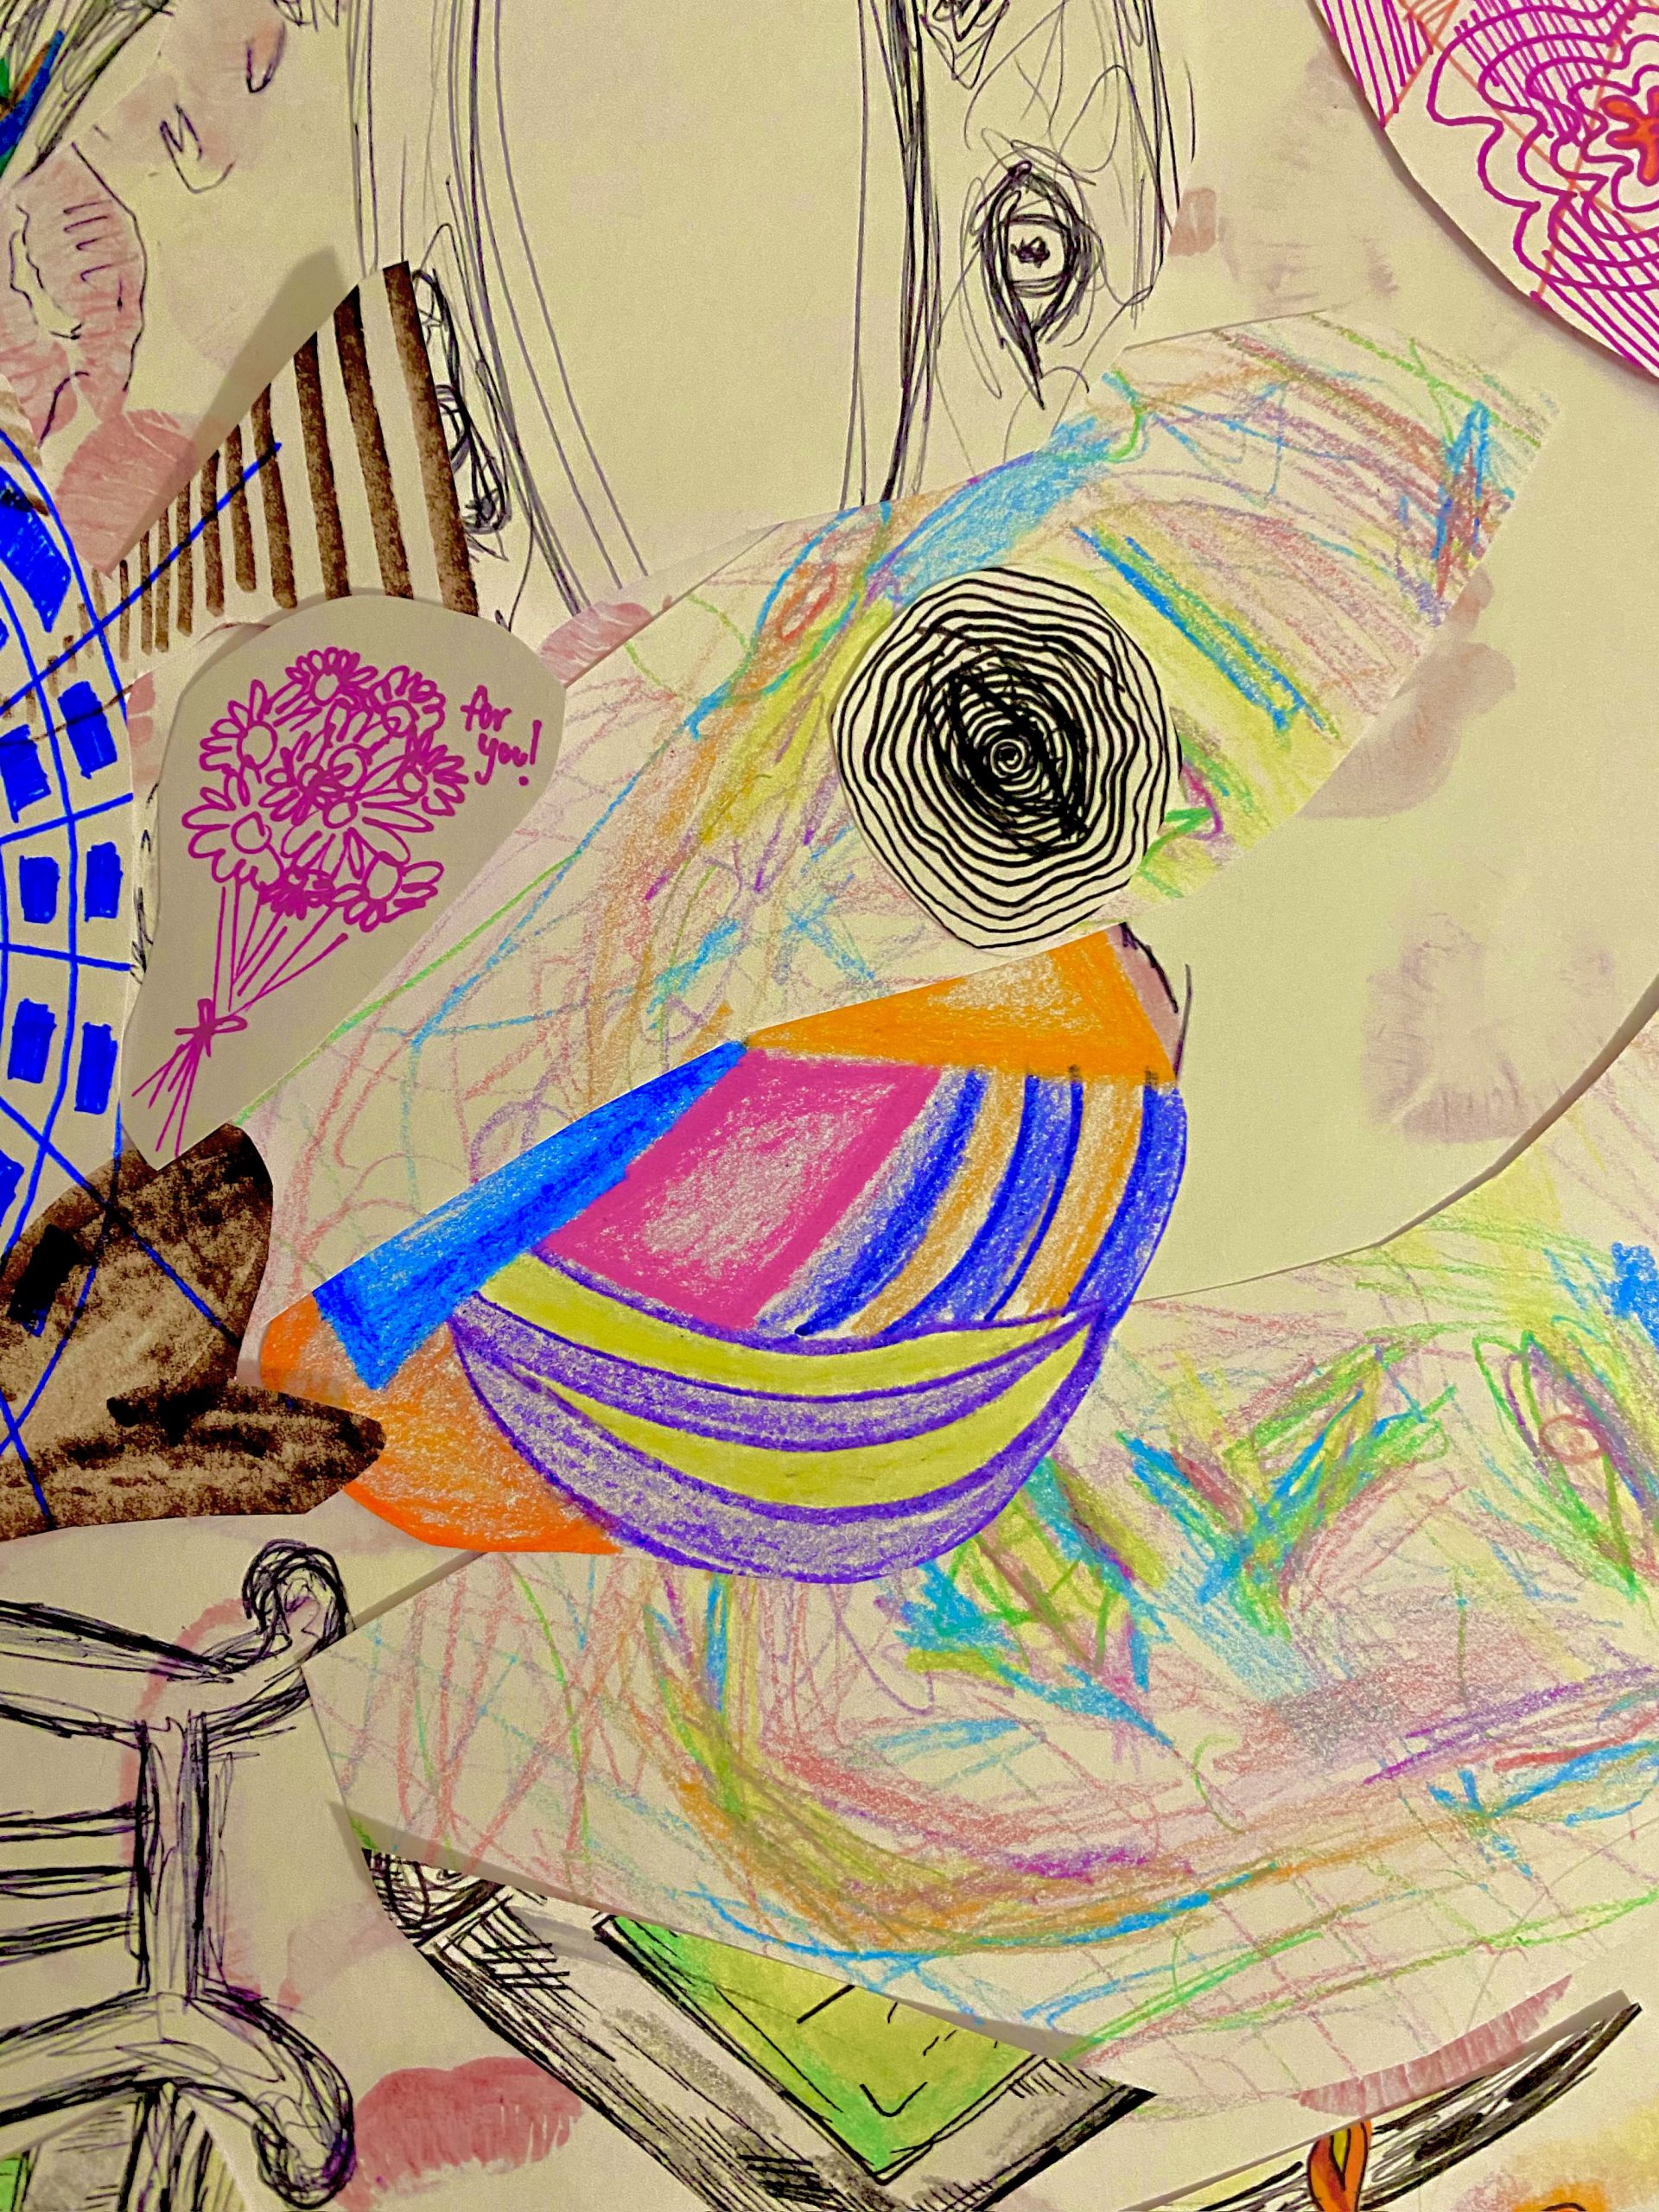 A frantic collage centered with a ripped drawing of half of a face. This half of the face is split from the other by blue, orange, pink, purple, and yellow shapes. There is a pink drawing of a bouquet of flowers, kiss stains, the edge of a lime-colored book, scribbled eyes, and violent colors of bright yellow, bright pink, and teal.